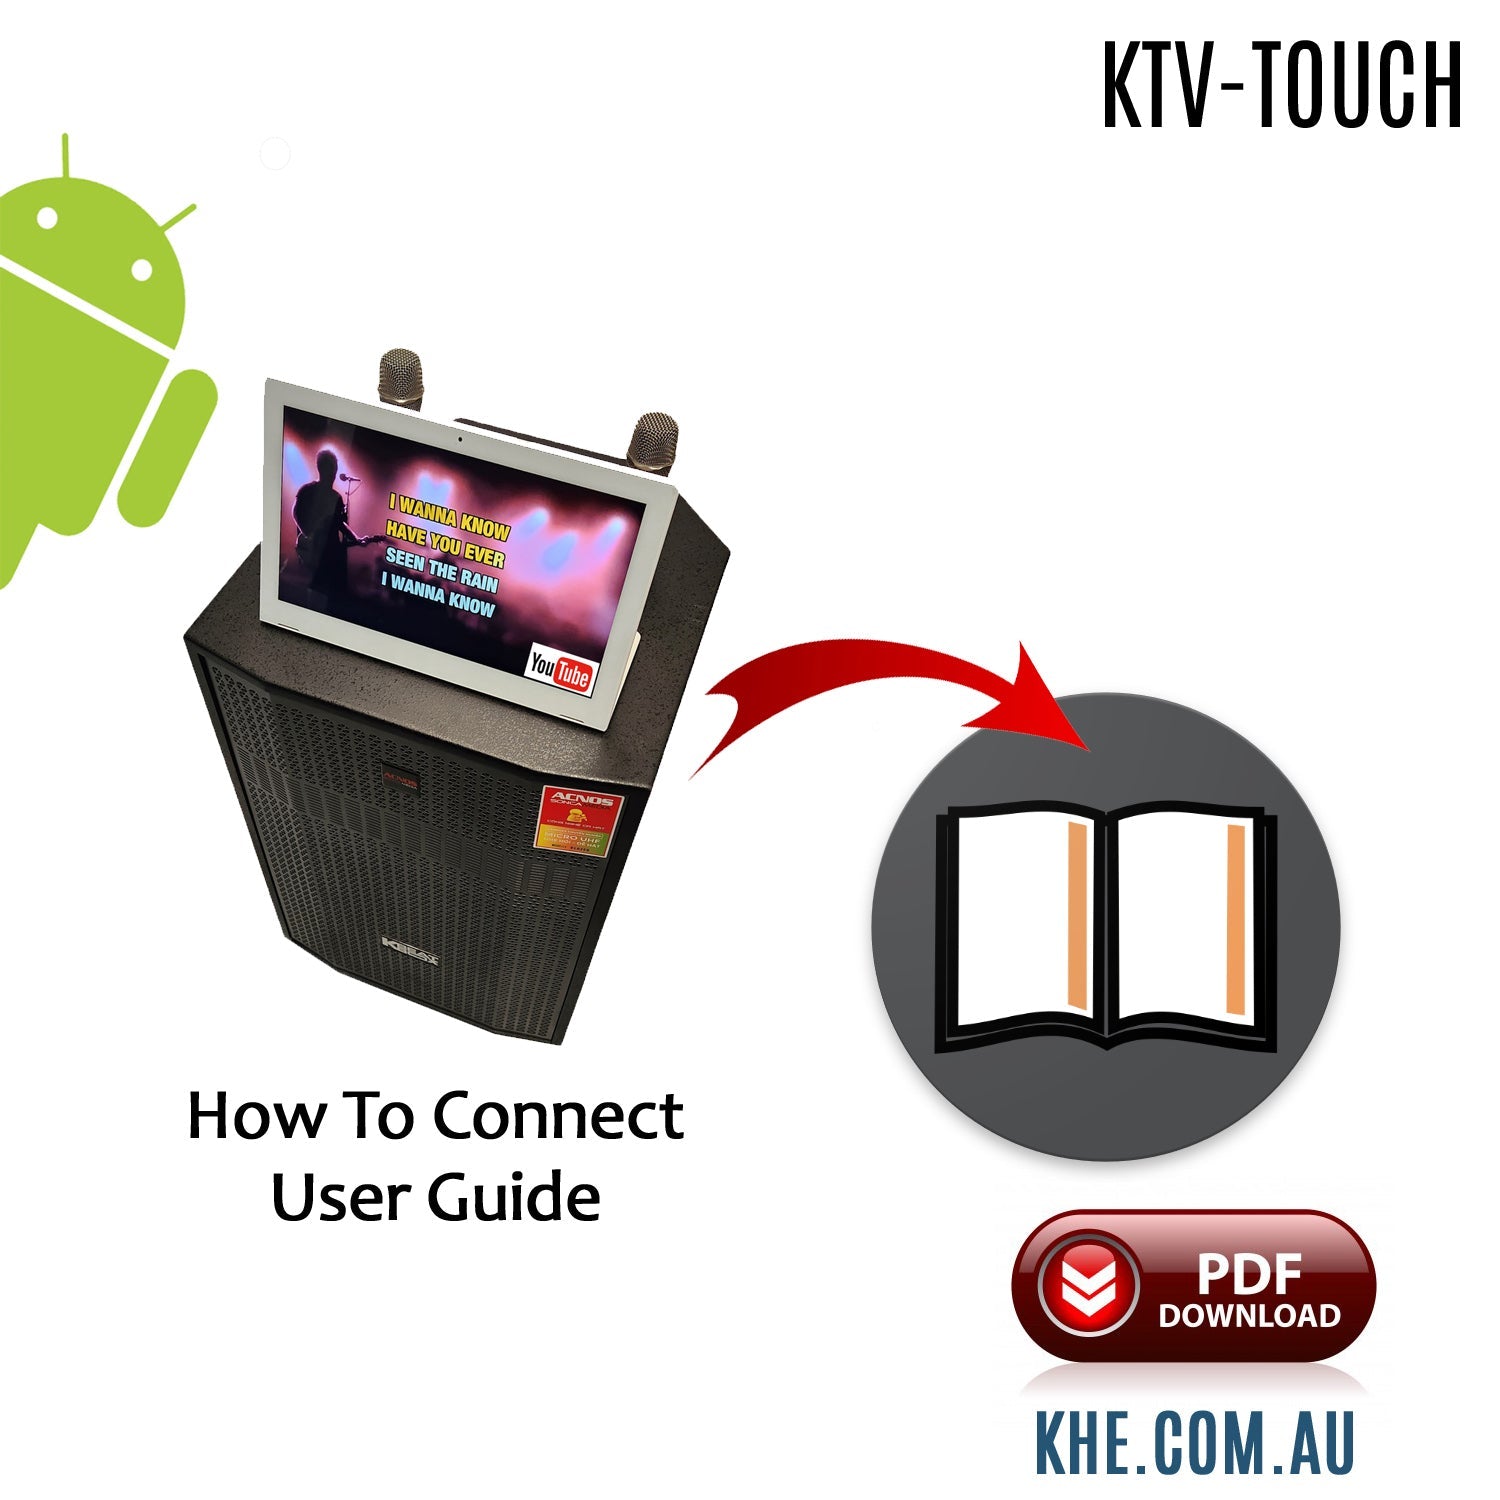 How To Connect Guide - Android KTV Touch Screen - Karaoke Home Entertainment